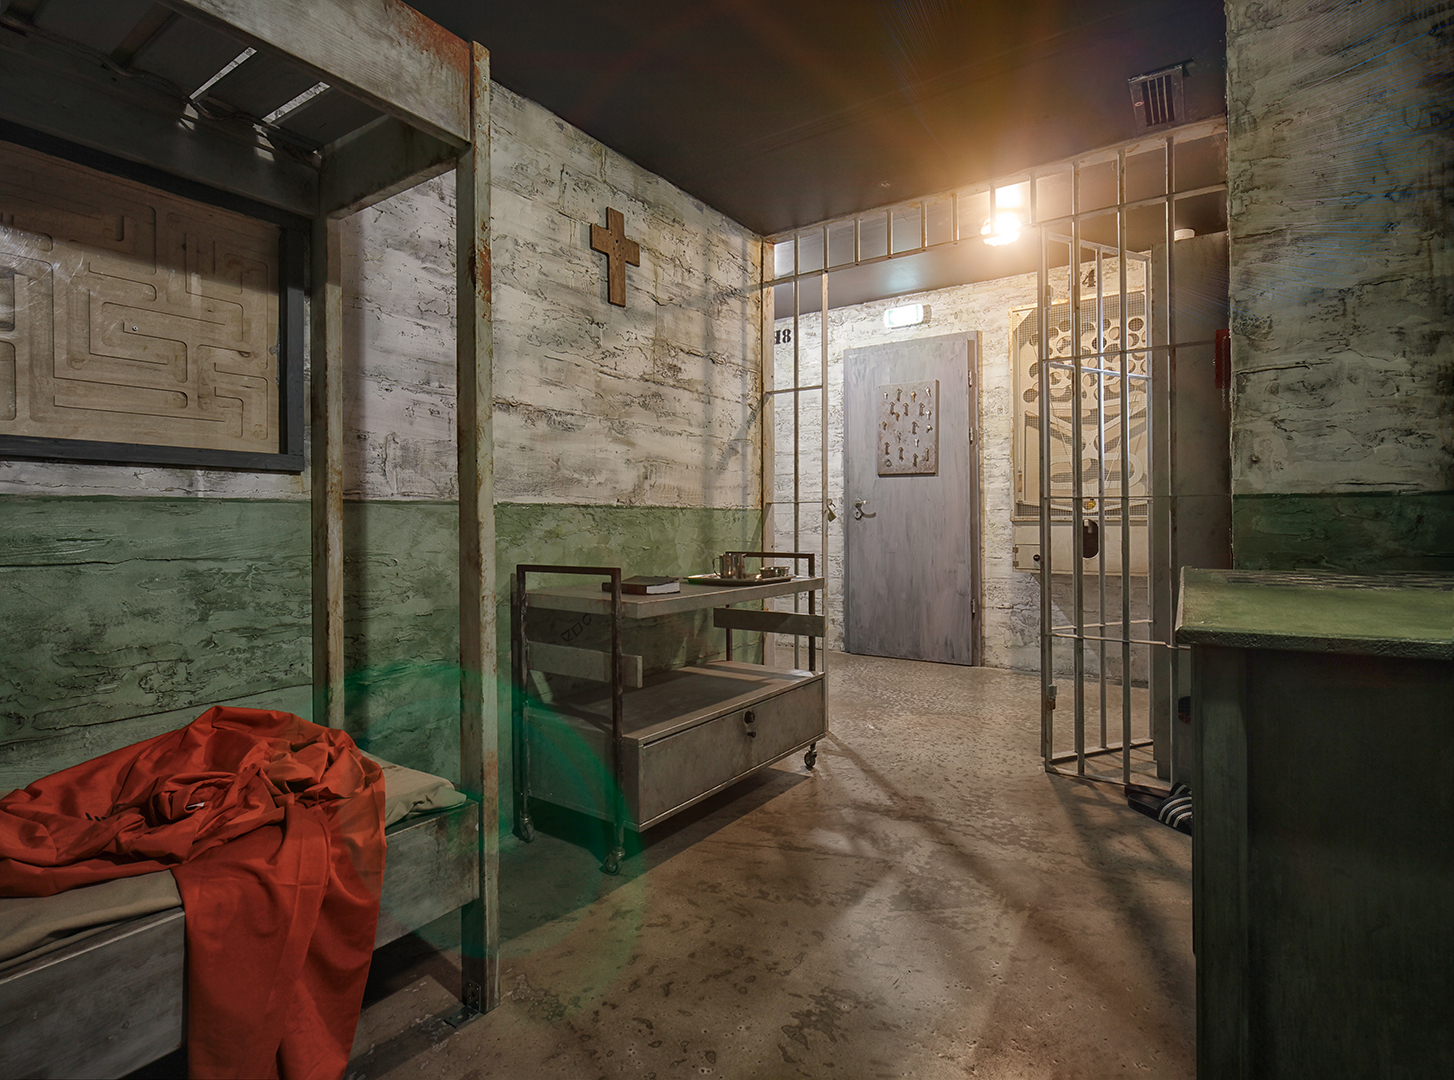 11 Of The Most Unbelievable Prison Escapes In History